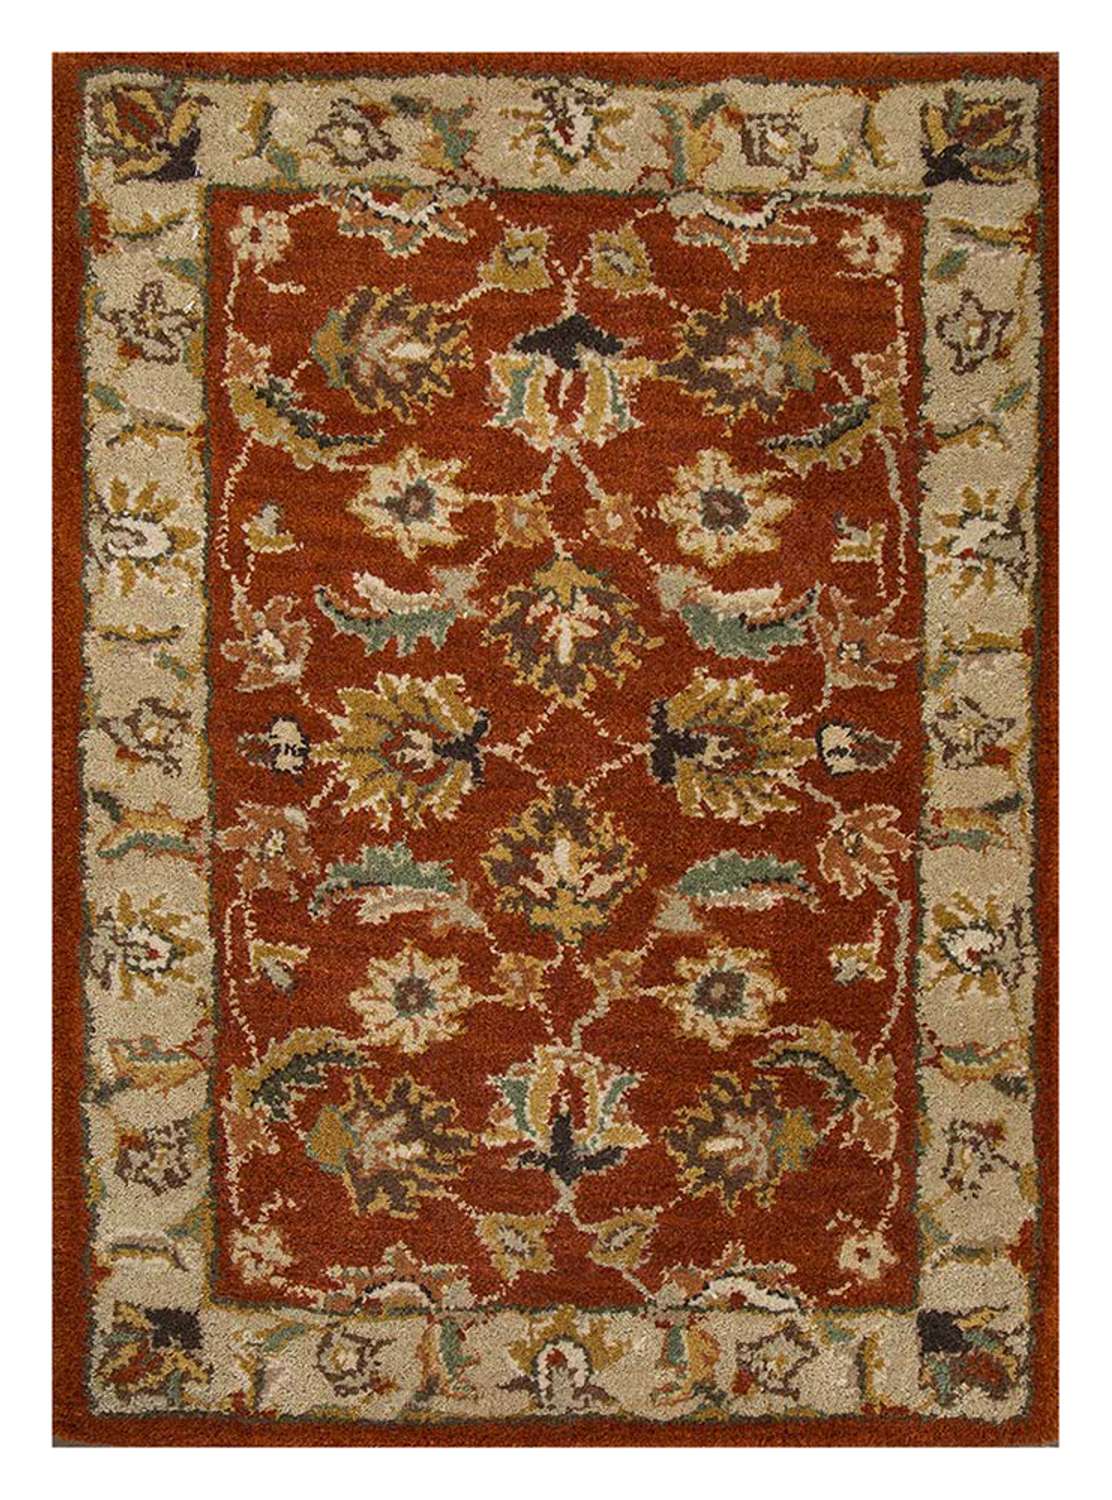 Wool Rug - August - rectangle